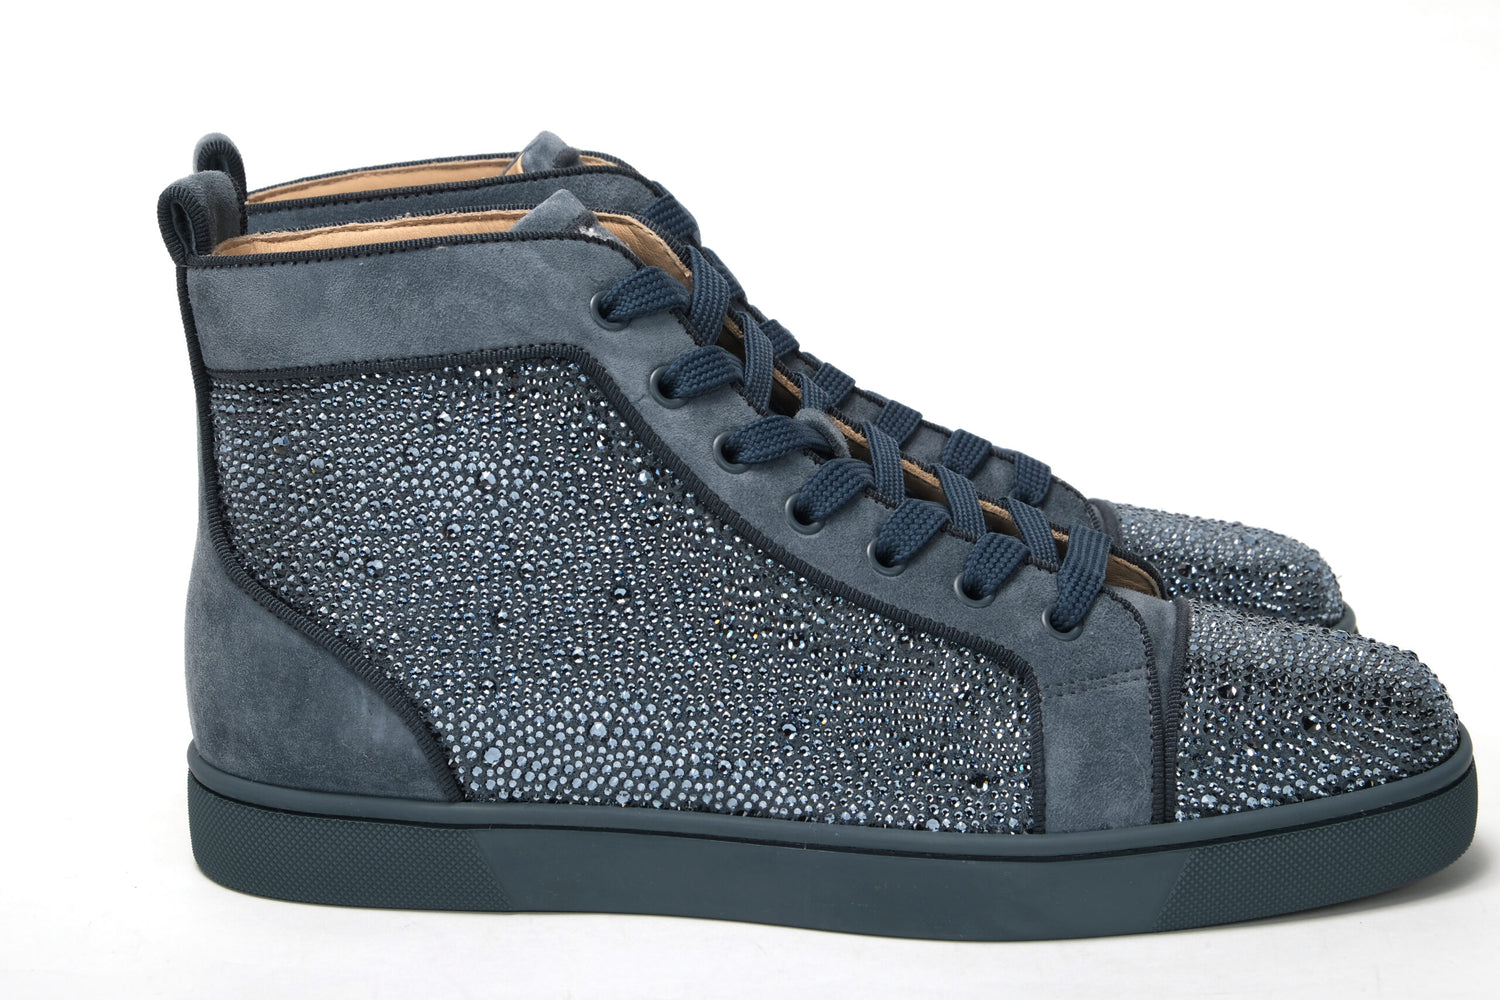 Louis - High-top sneakers - Veau velours and spikes - Black - Christian  Louboutin United States